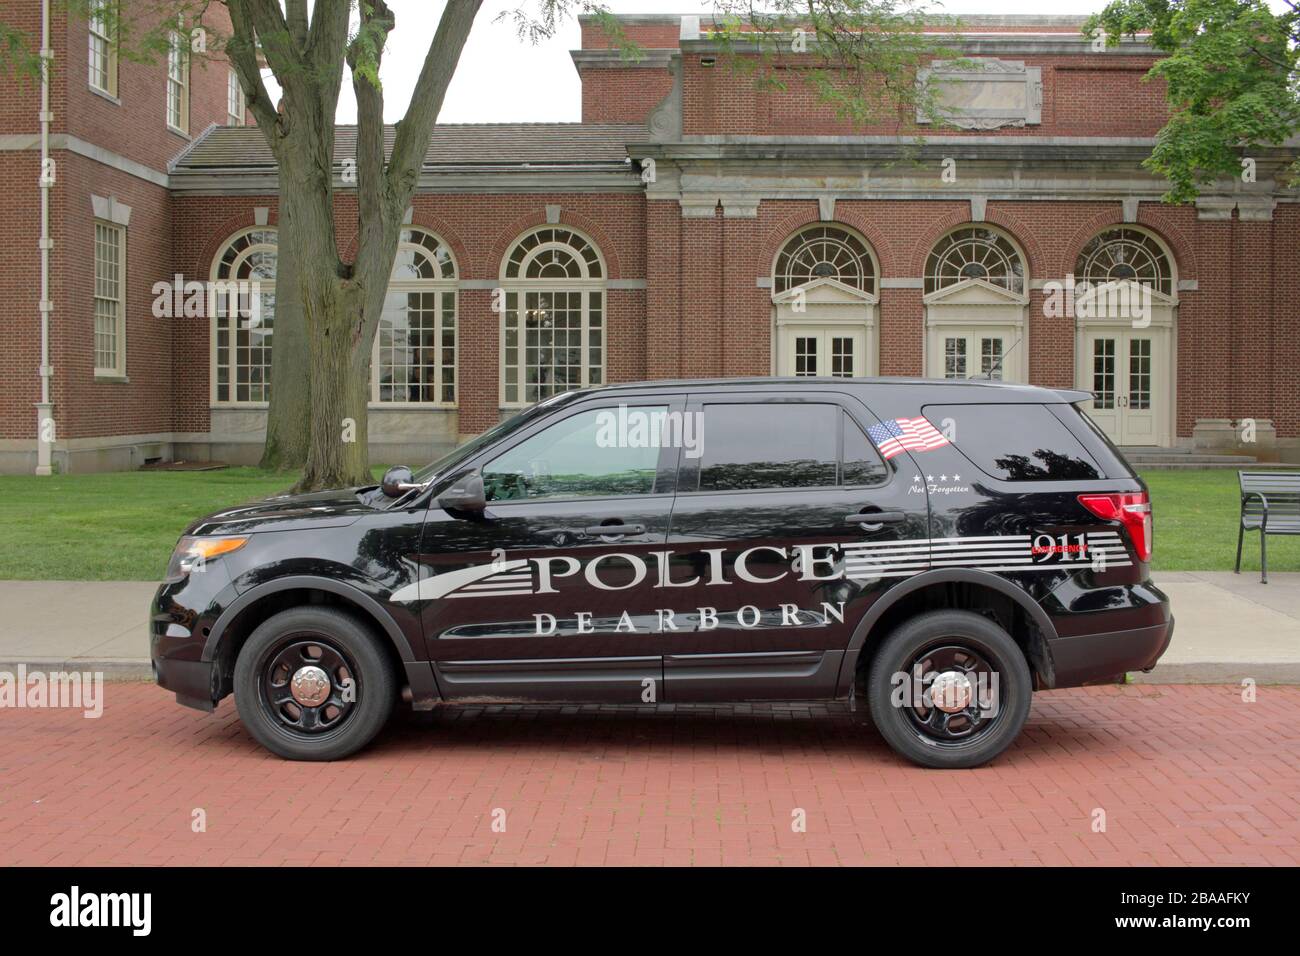 Dearborn Police Department vehicle outside the Henry Ford Museum, Dearborn, Michigan, USA Stock Photo